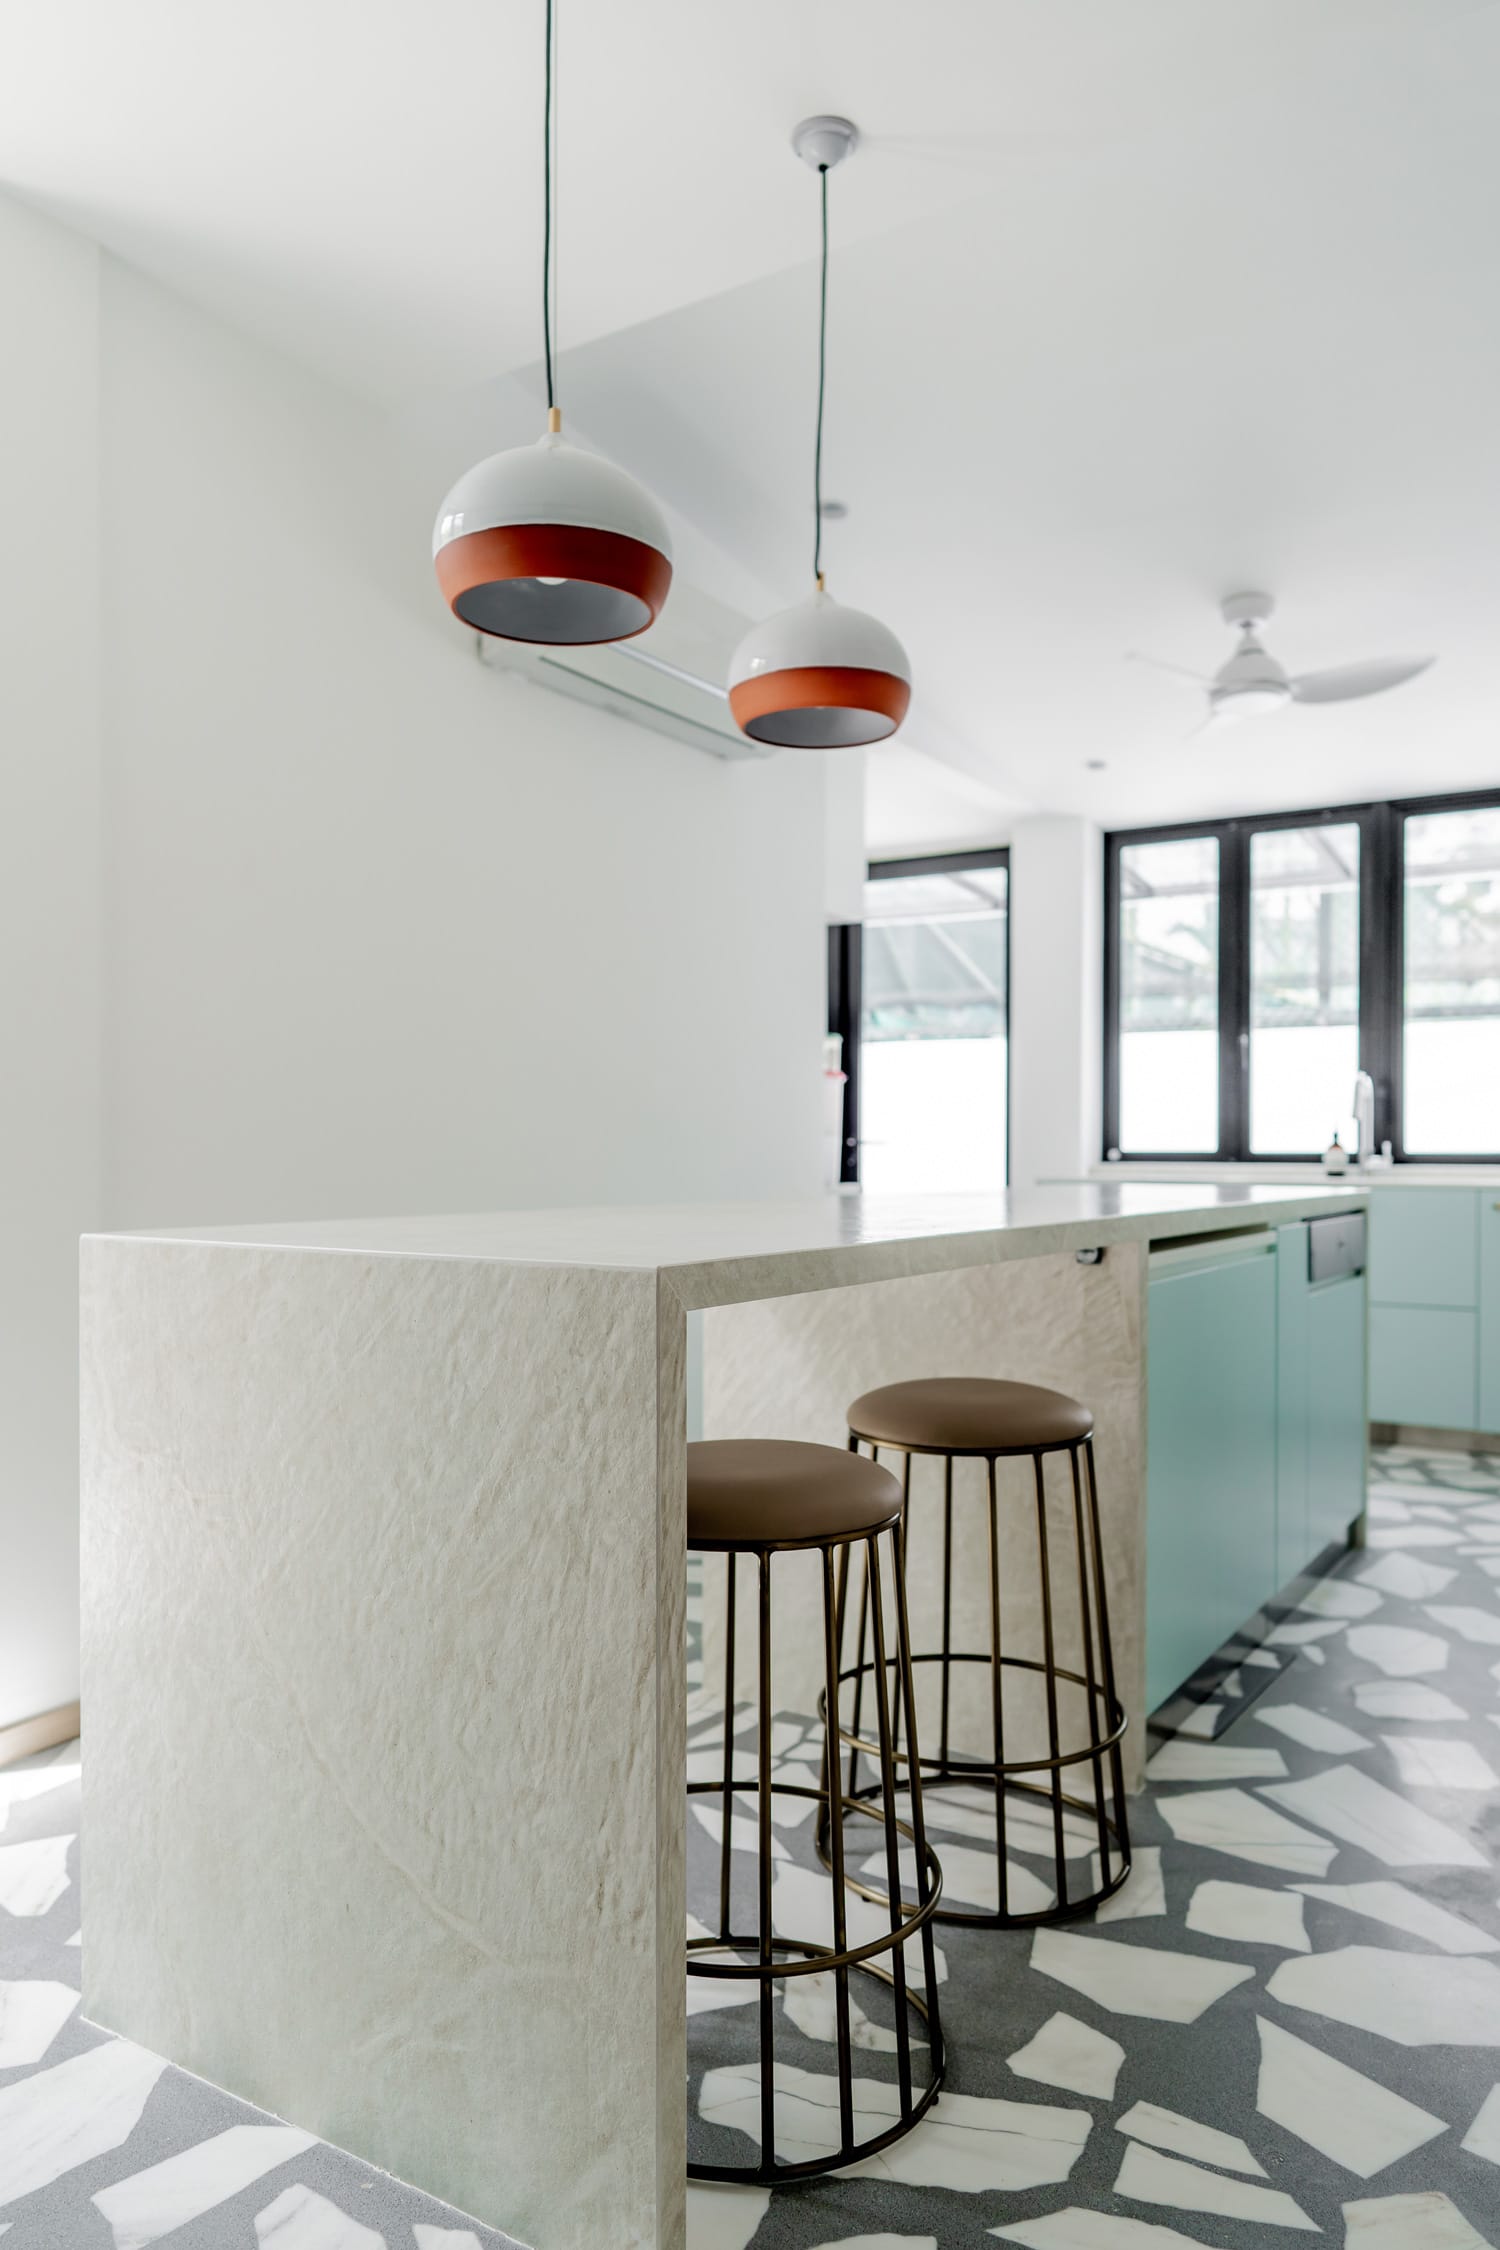 Image of Singapour Residential Maddy Barber 4 in Old home, new glamour: balm for the soul - Cosentino